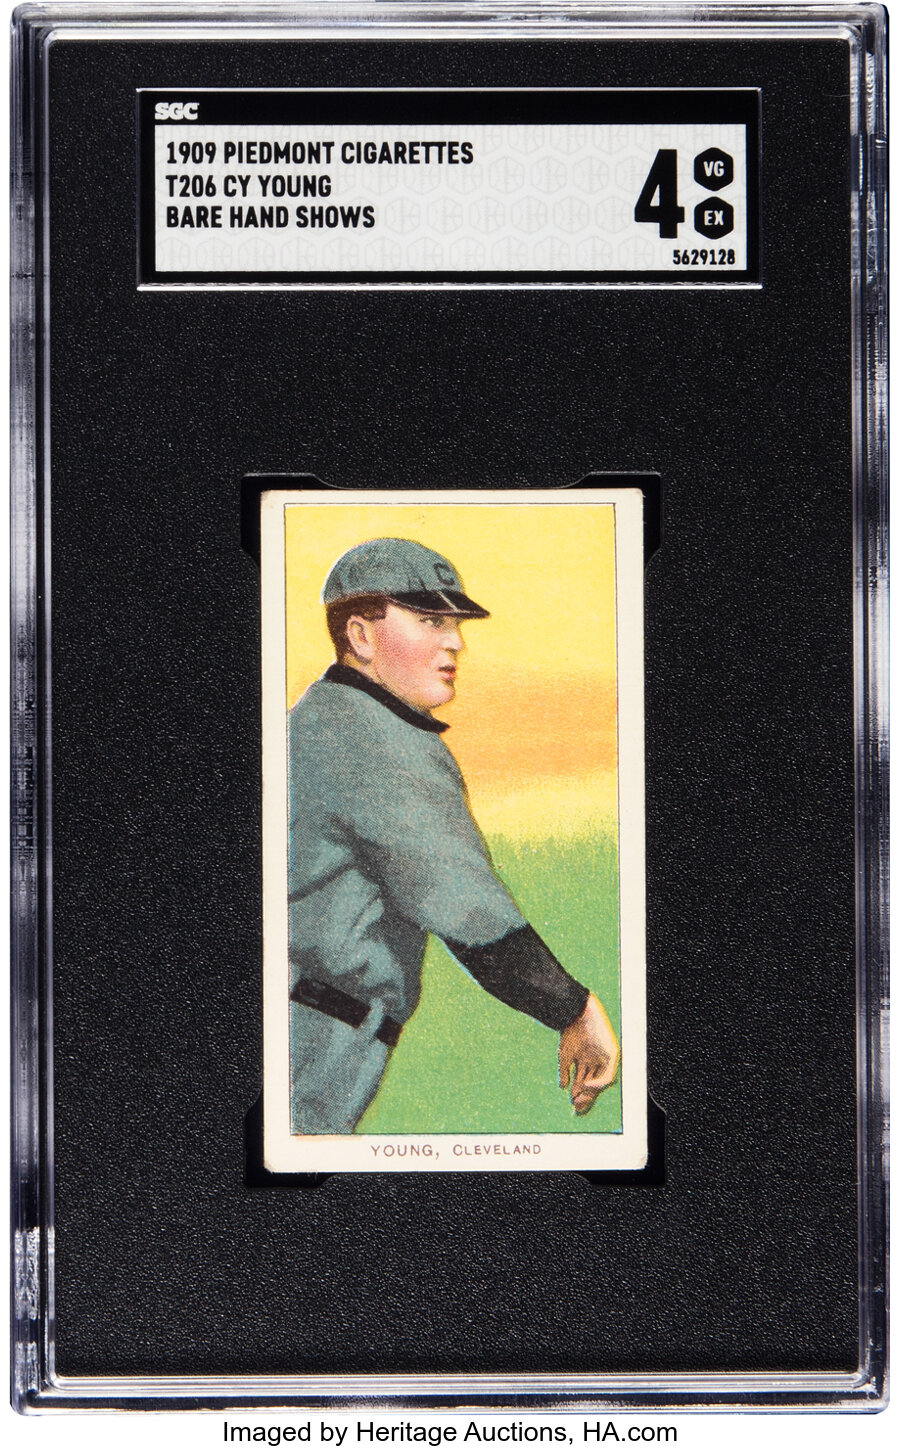 1909-11 T206 Piedmont 150 Cy Young (Bare Hands Shows) SGC VG-EX 4